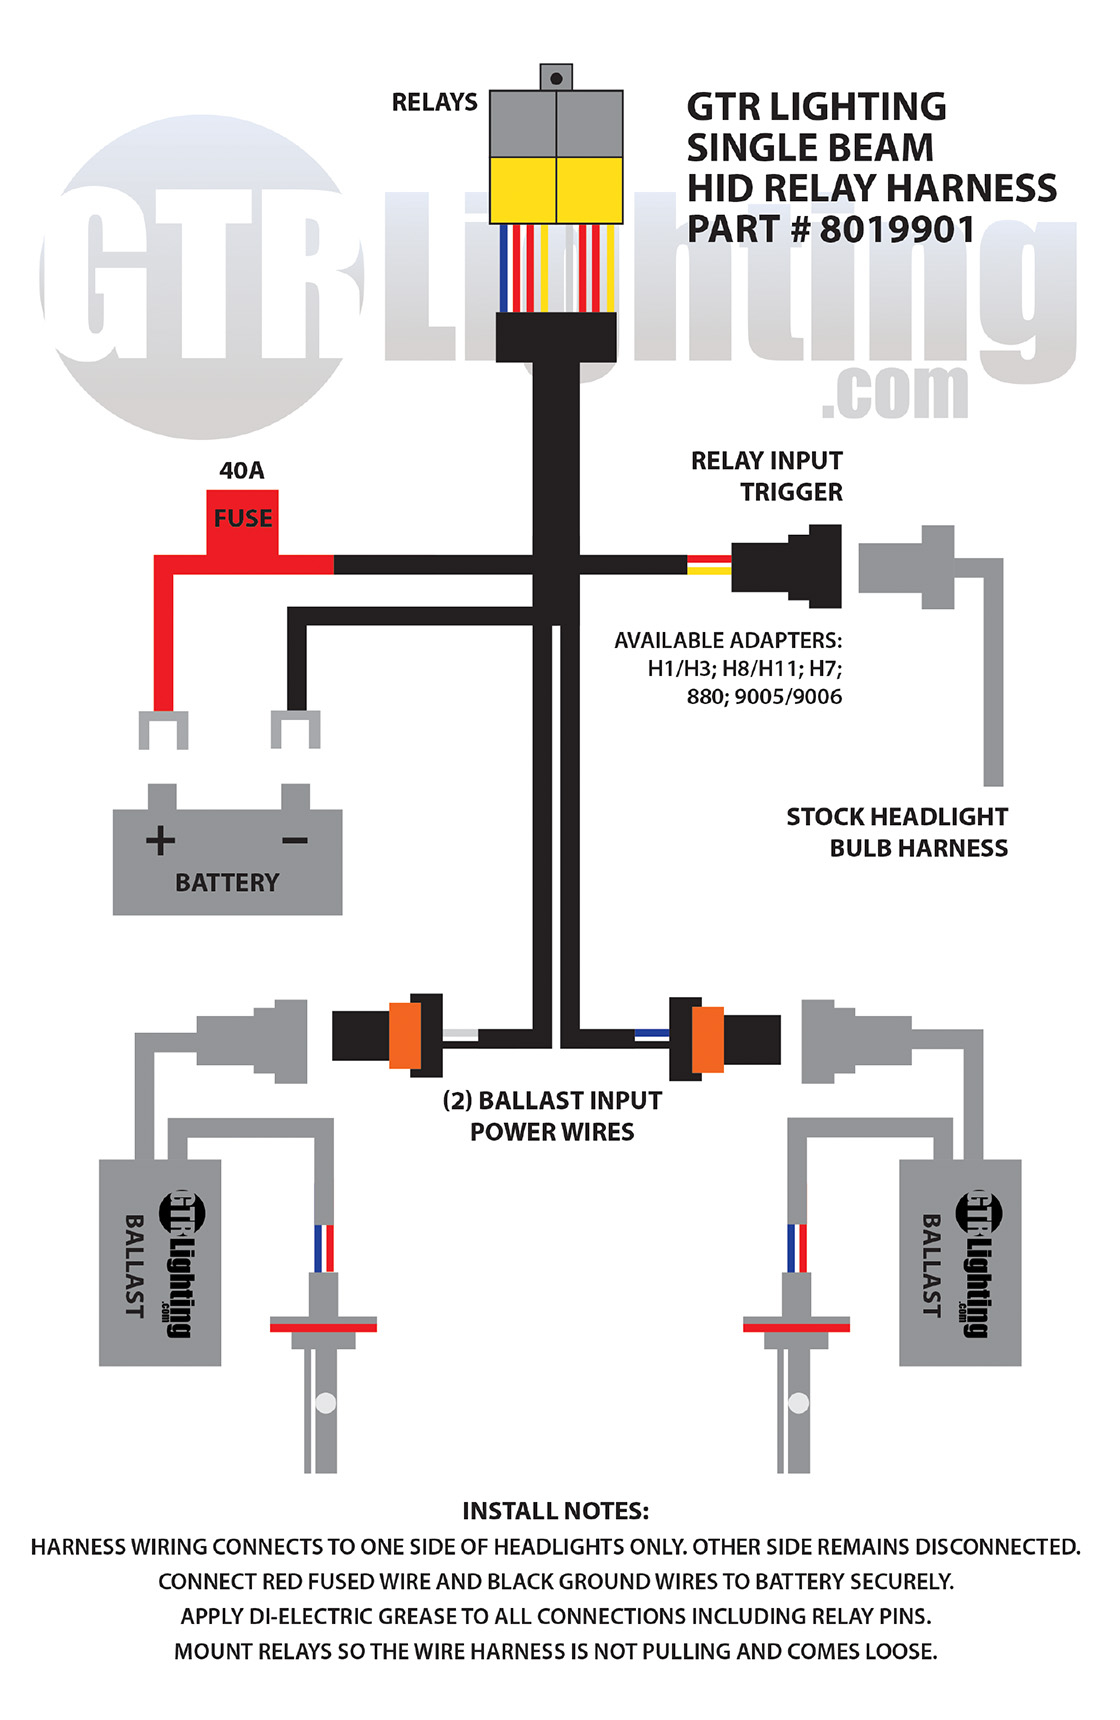 Do I Need A Relay Harness? And How Do You Install It? - Gtr Lighting - Hid Wiring Diagram